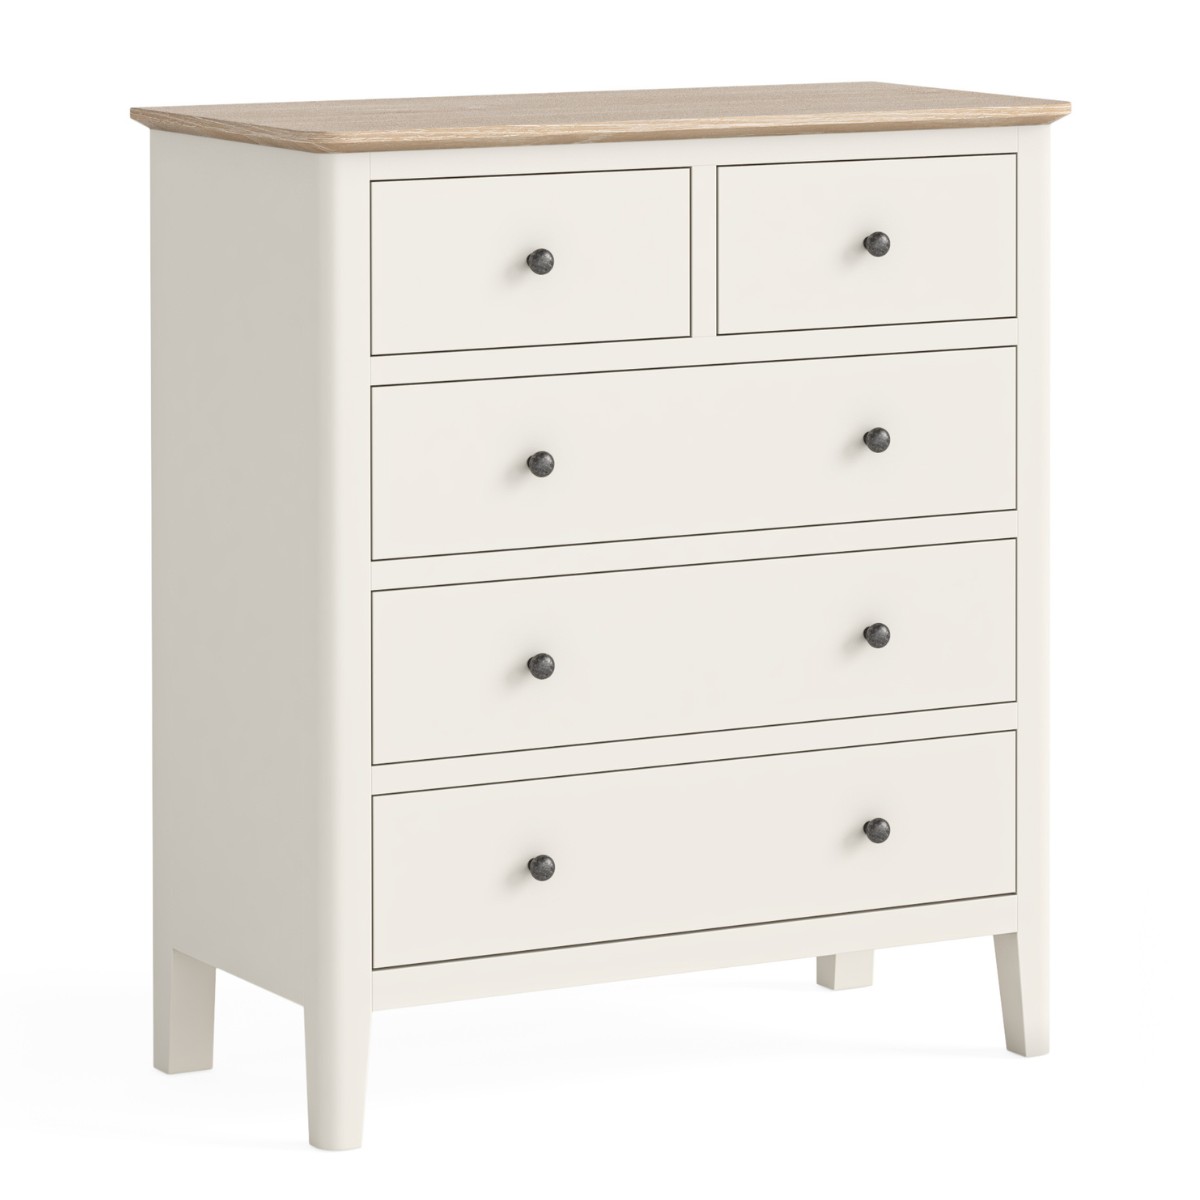 Marcella White 5 Drawer Chest of Drawers